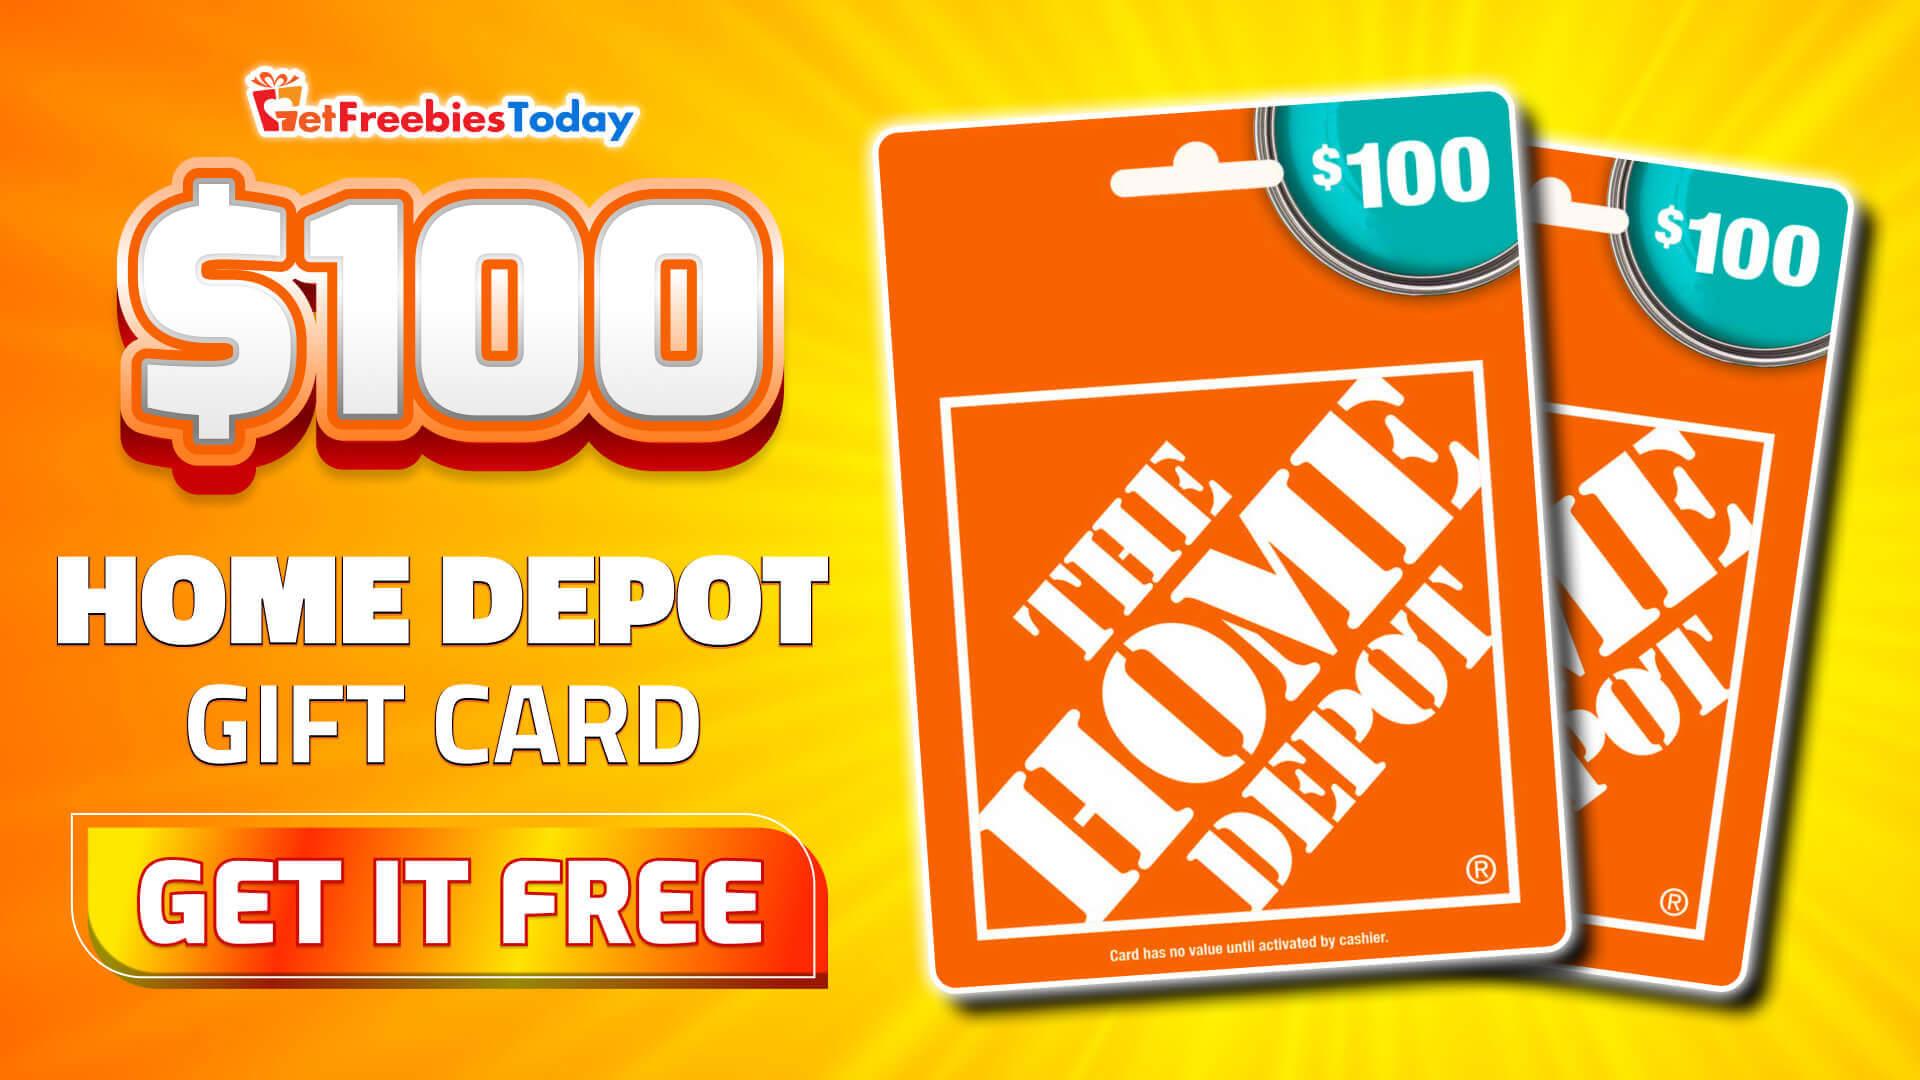 Claim $100 Home Depot Gift Card Without Paying